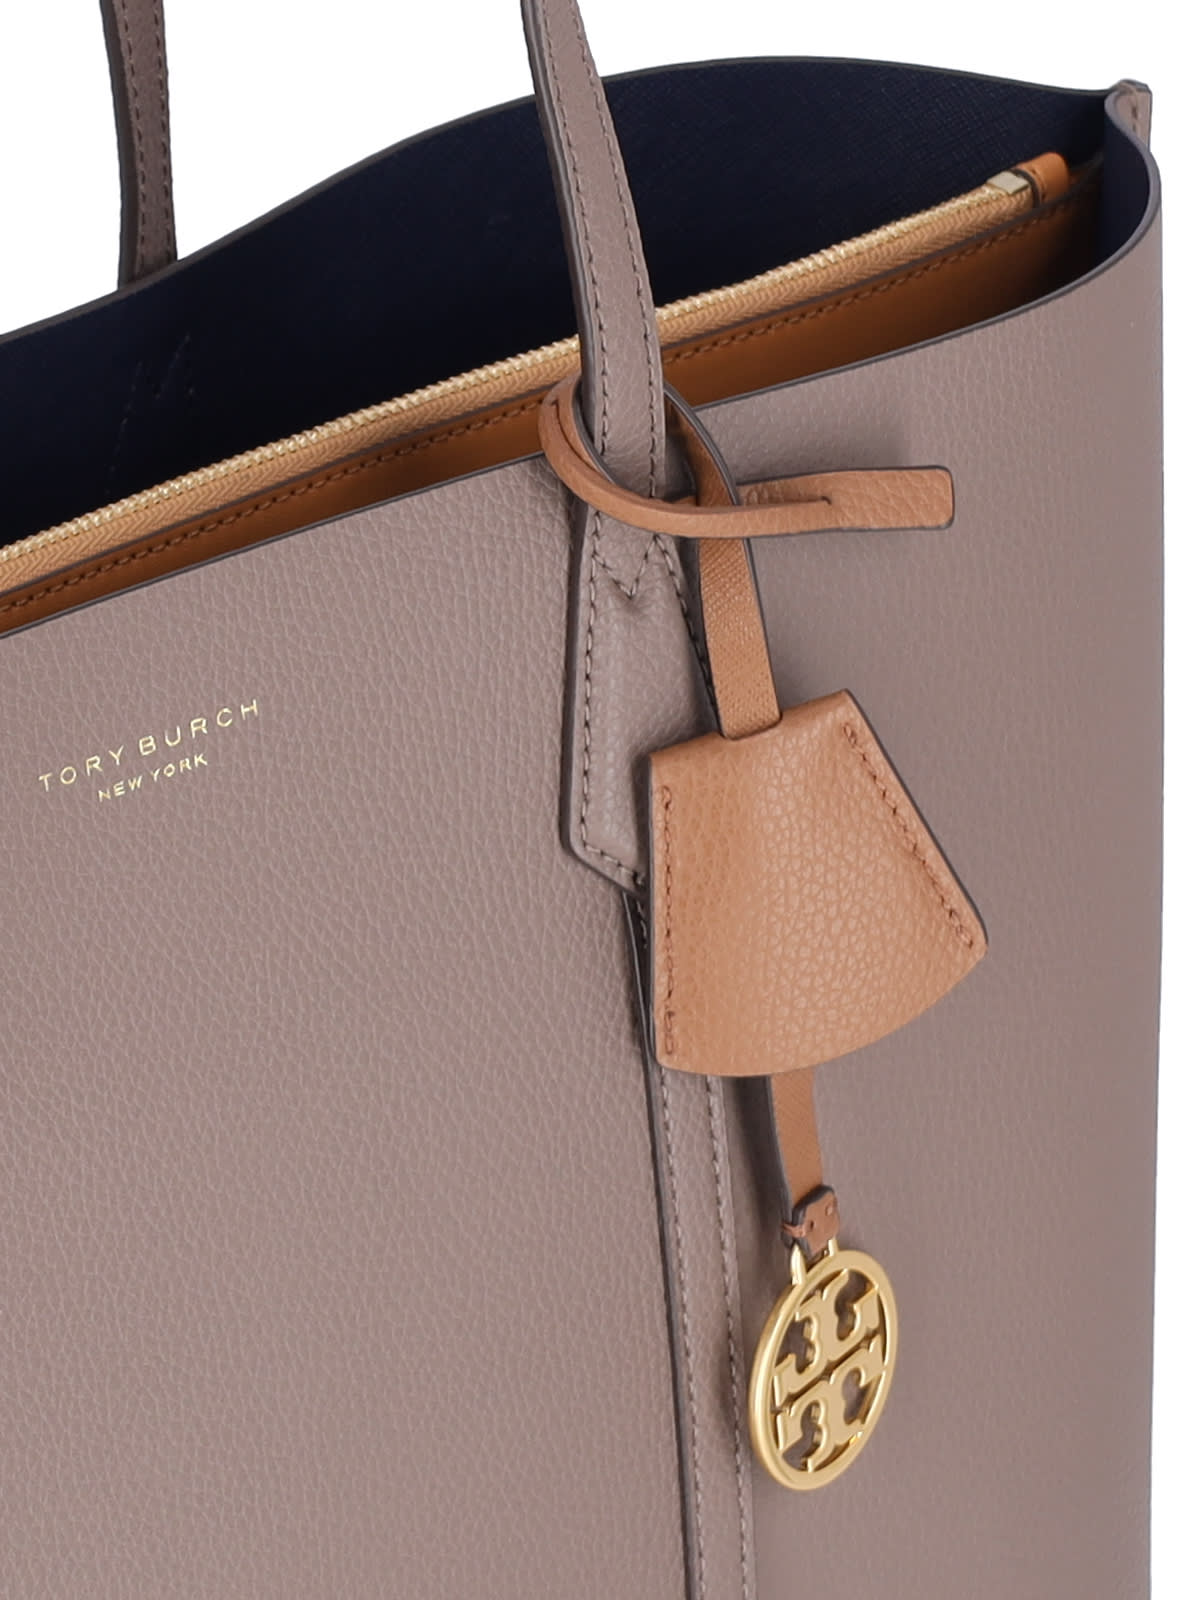 Shop Tory Burch Perry Tote Bag In Taupe